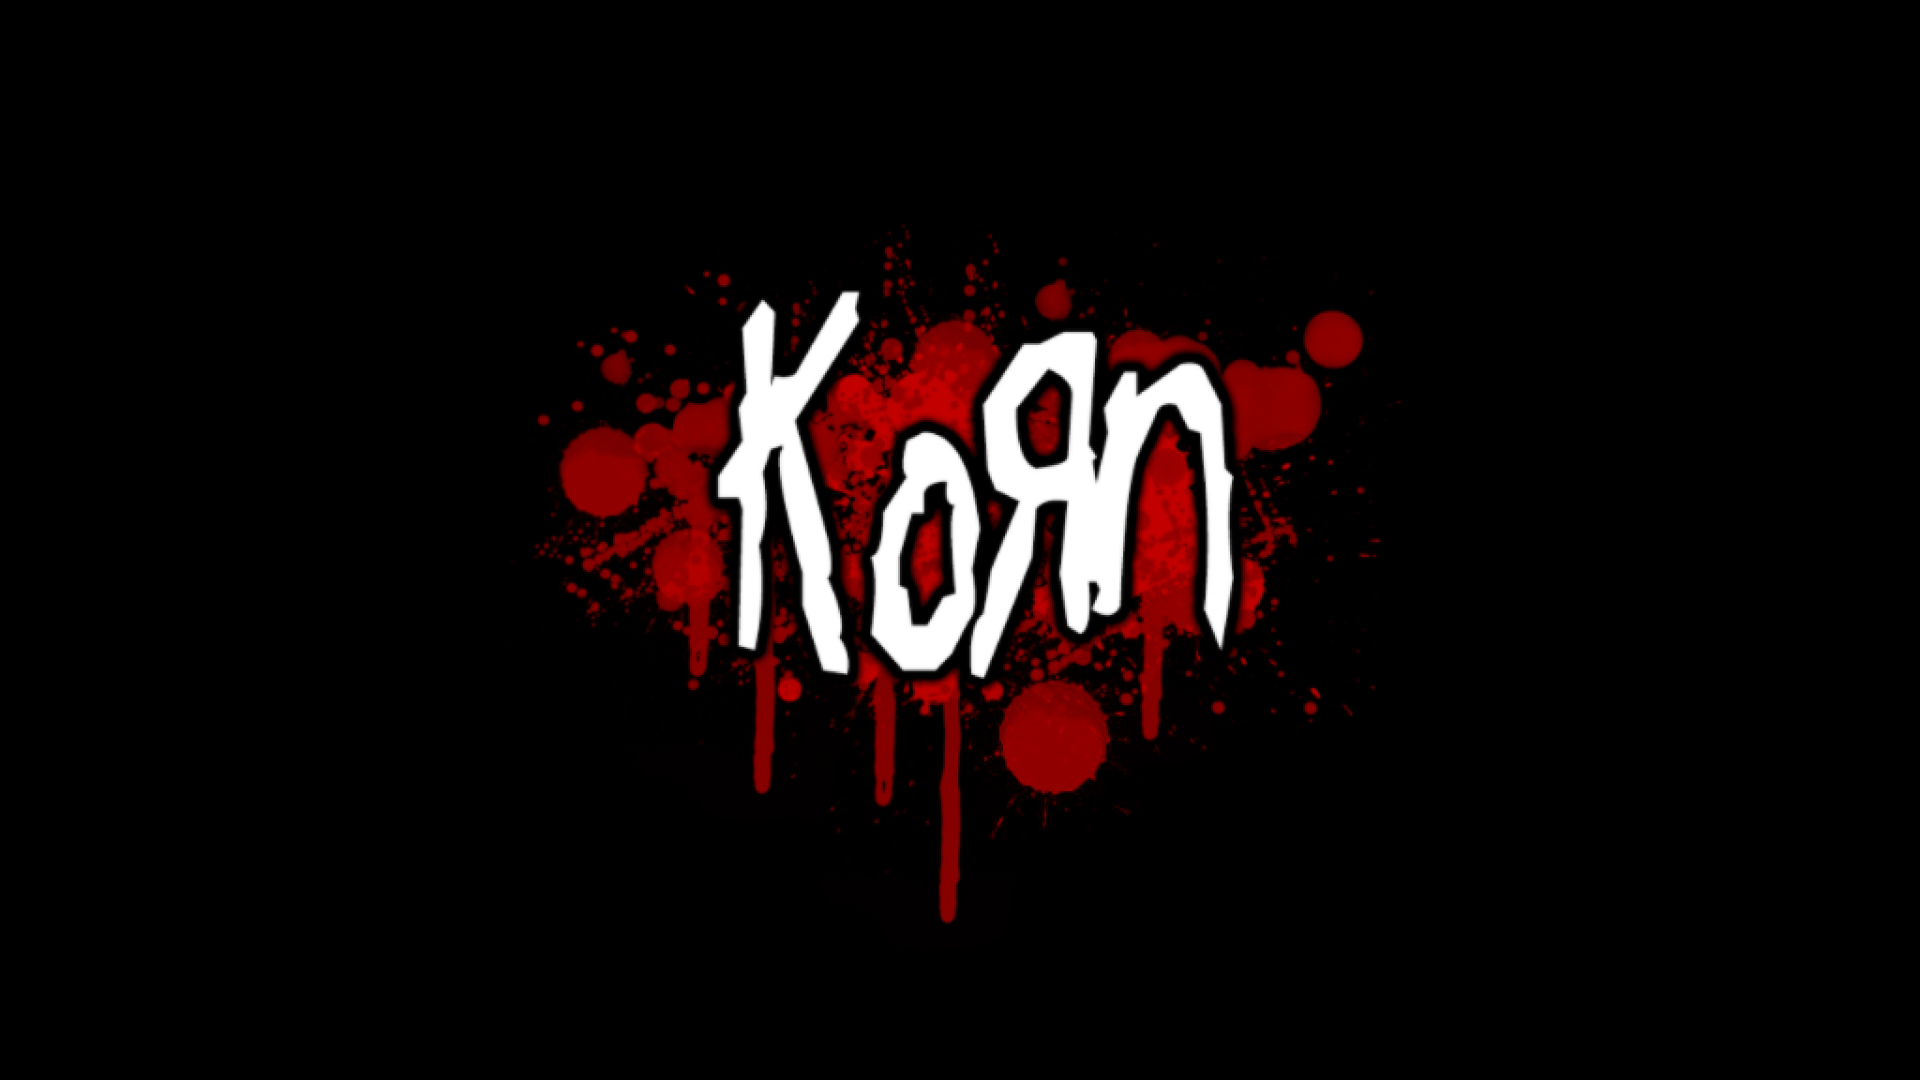 Korn wallpaper - (#181553) - High Quality and Resolution ...